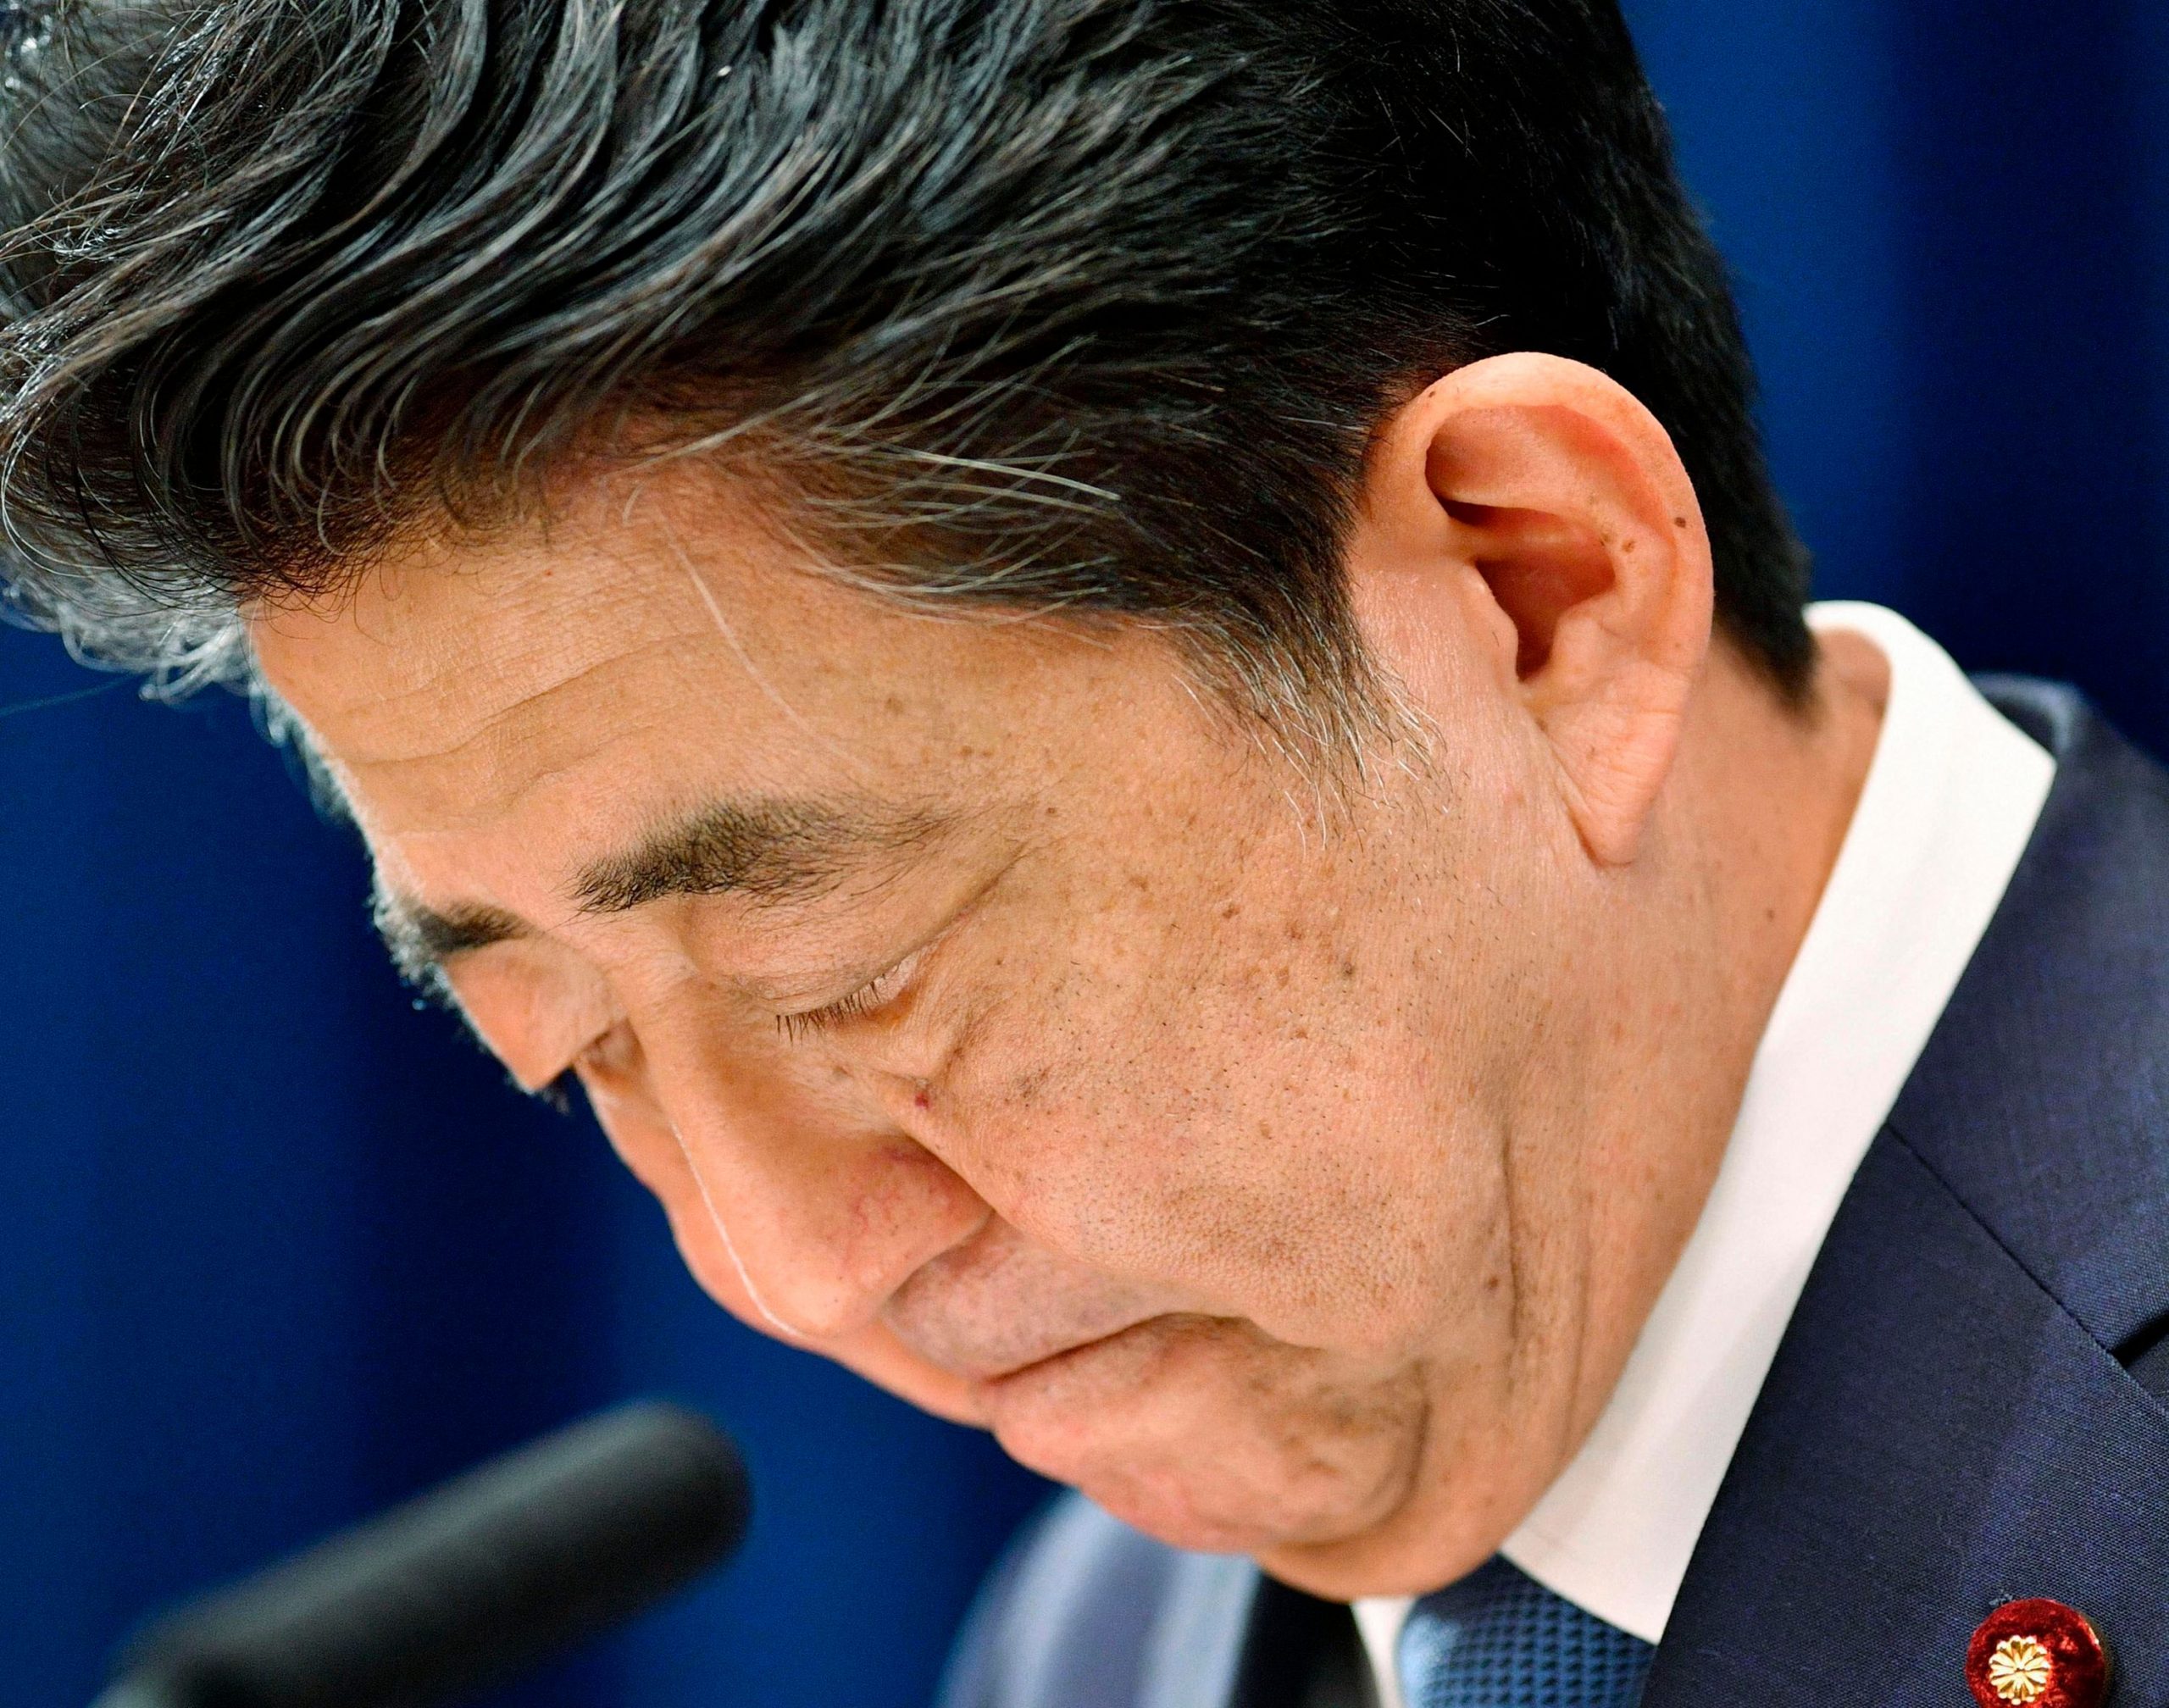 Shinzo Abe shooting: A look at the political journey of former Japan PM